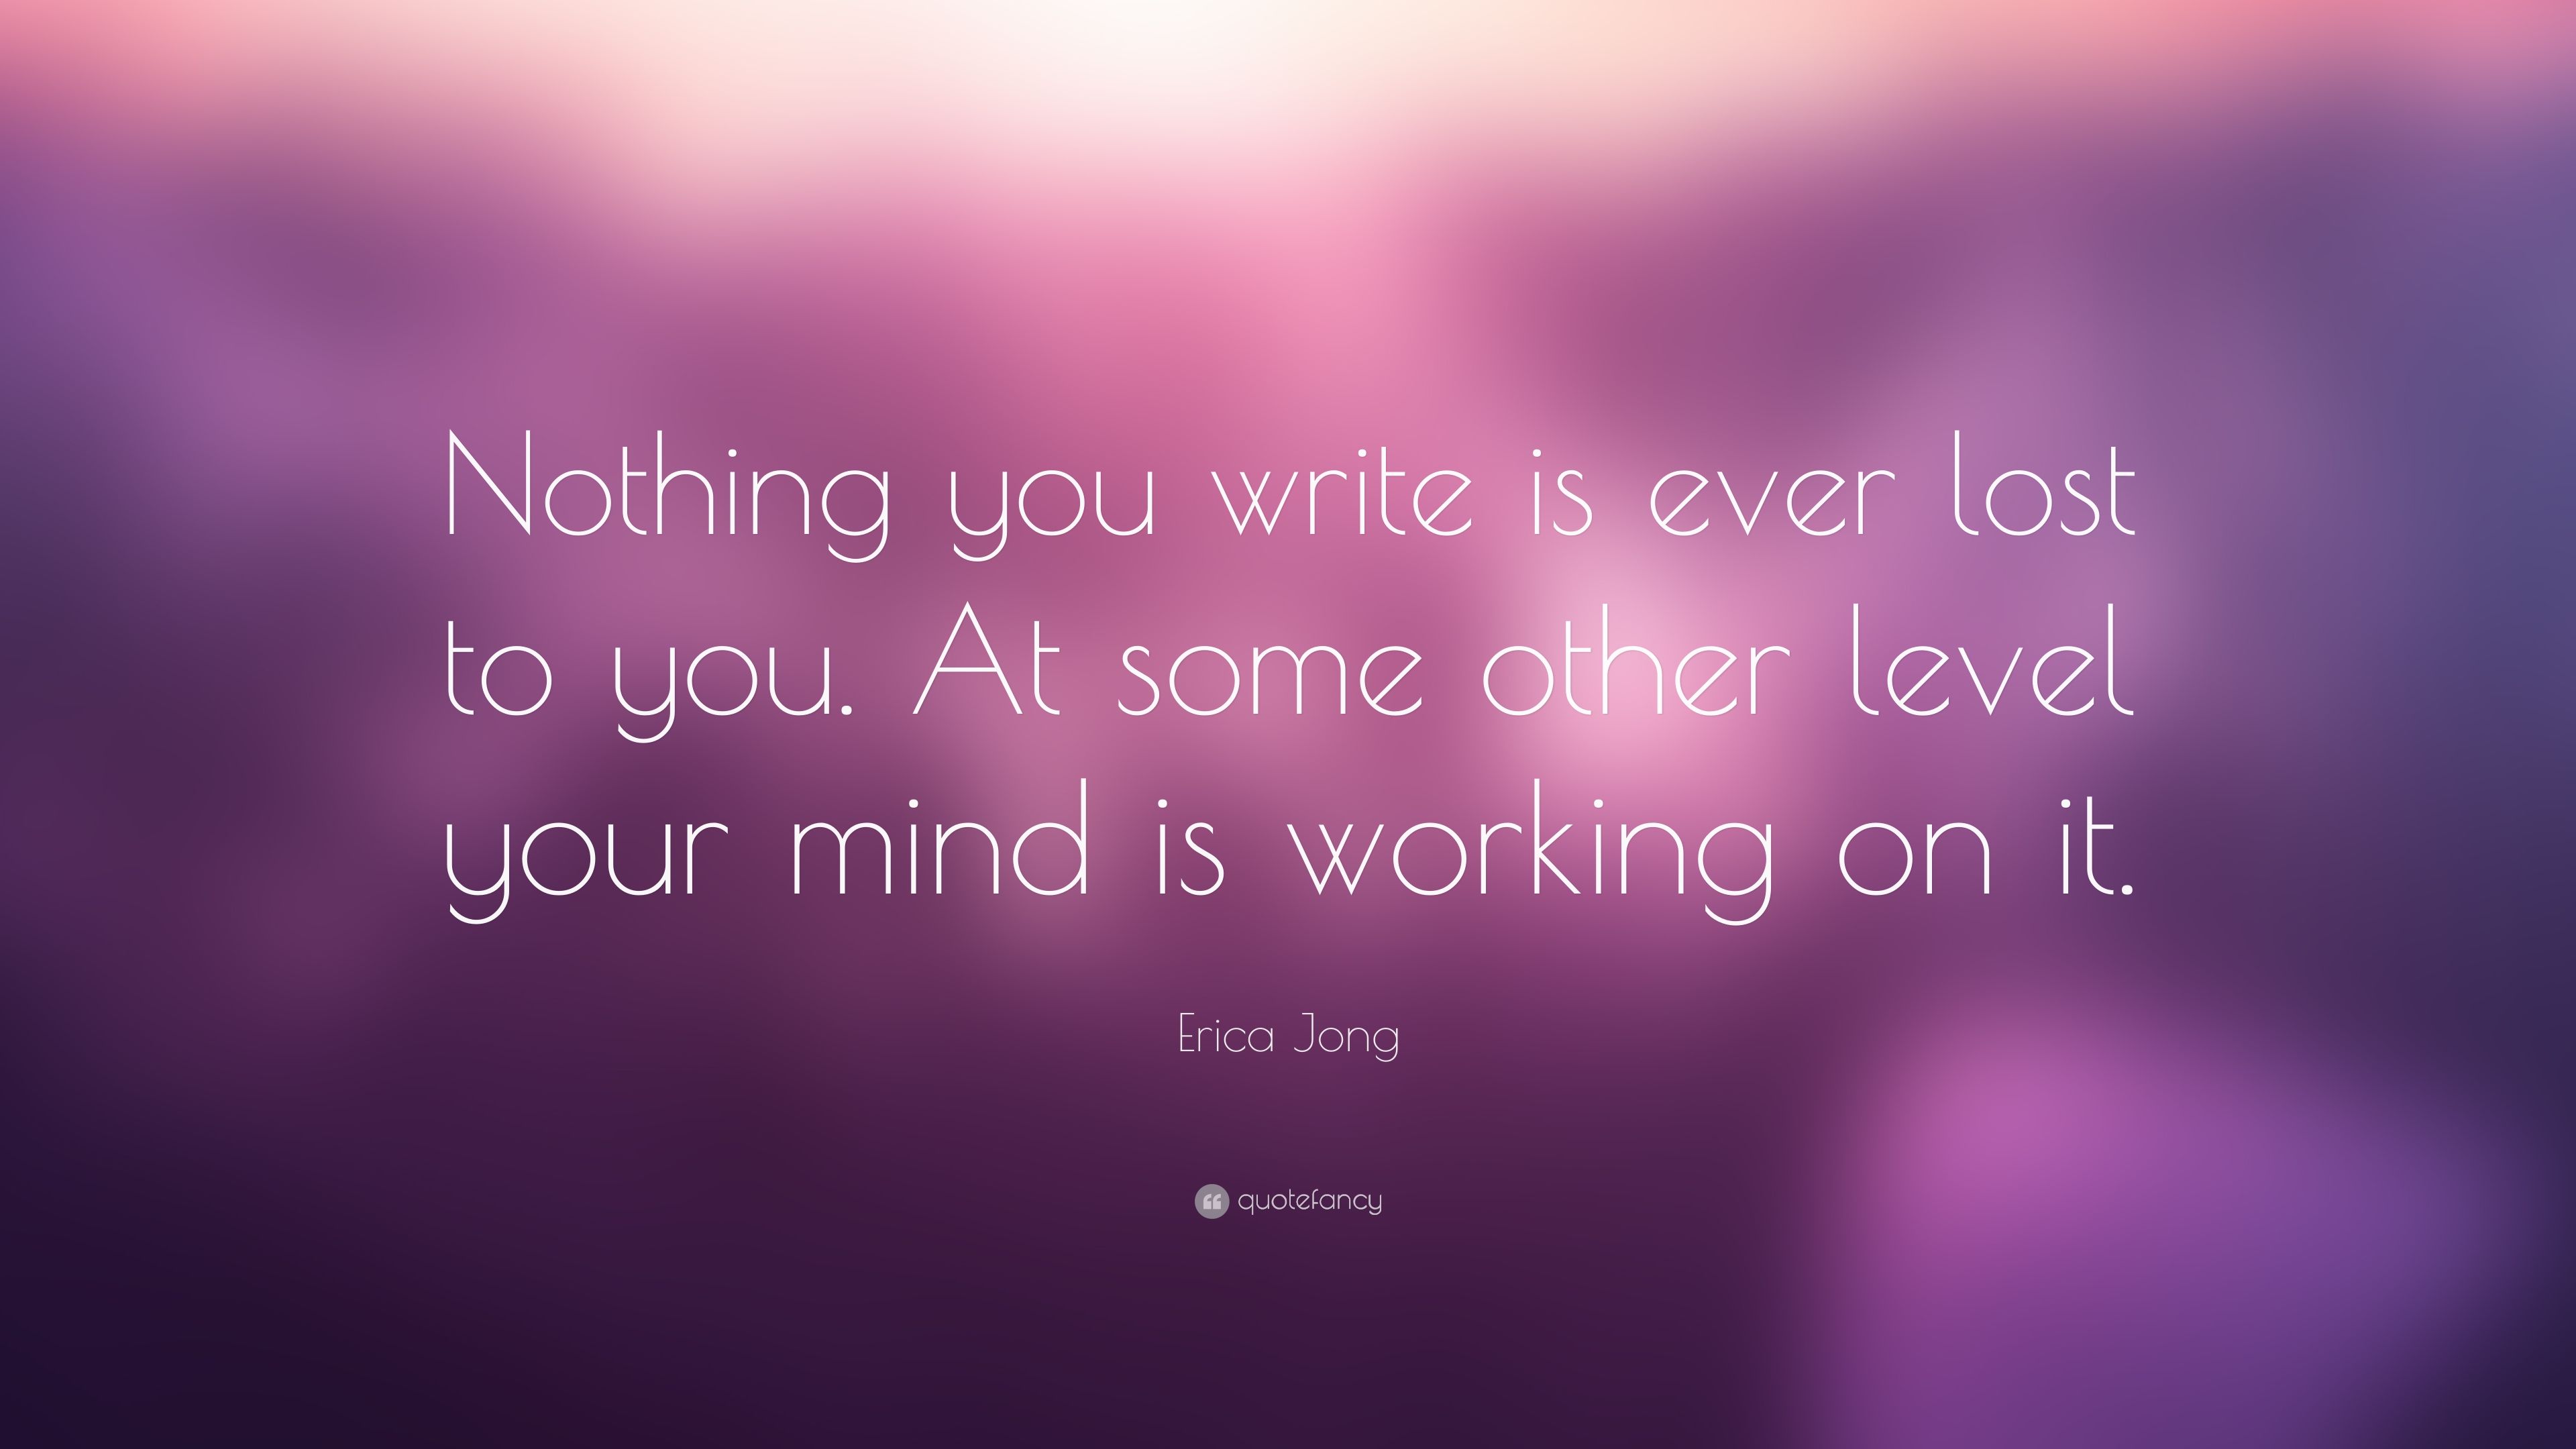 Erica Jong Quote: “Nothing you write is ever lost to you. At some other level your mind is working on it.” (6 wallpaper)